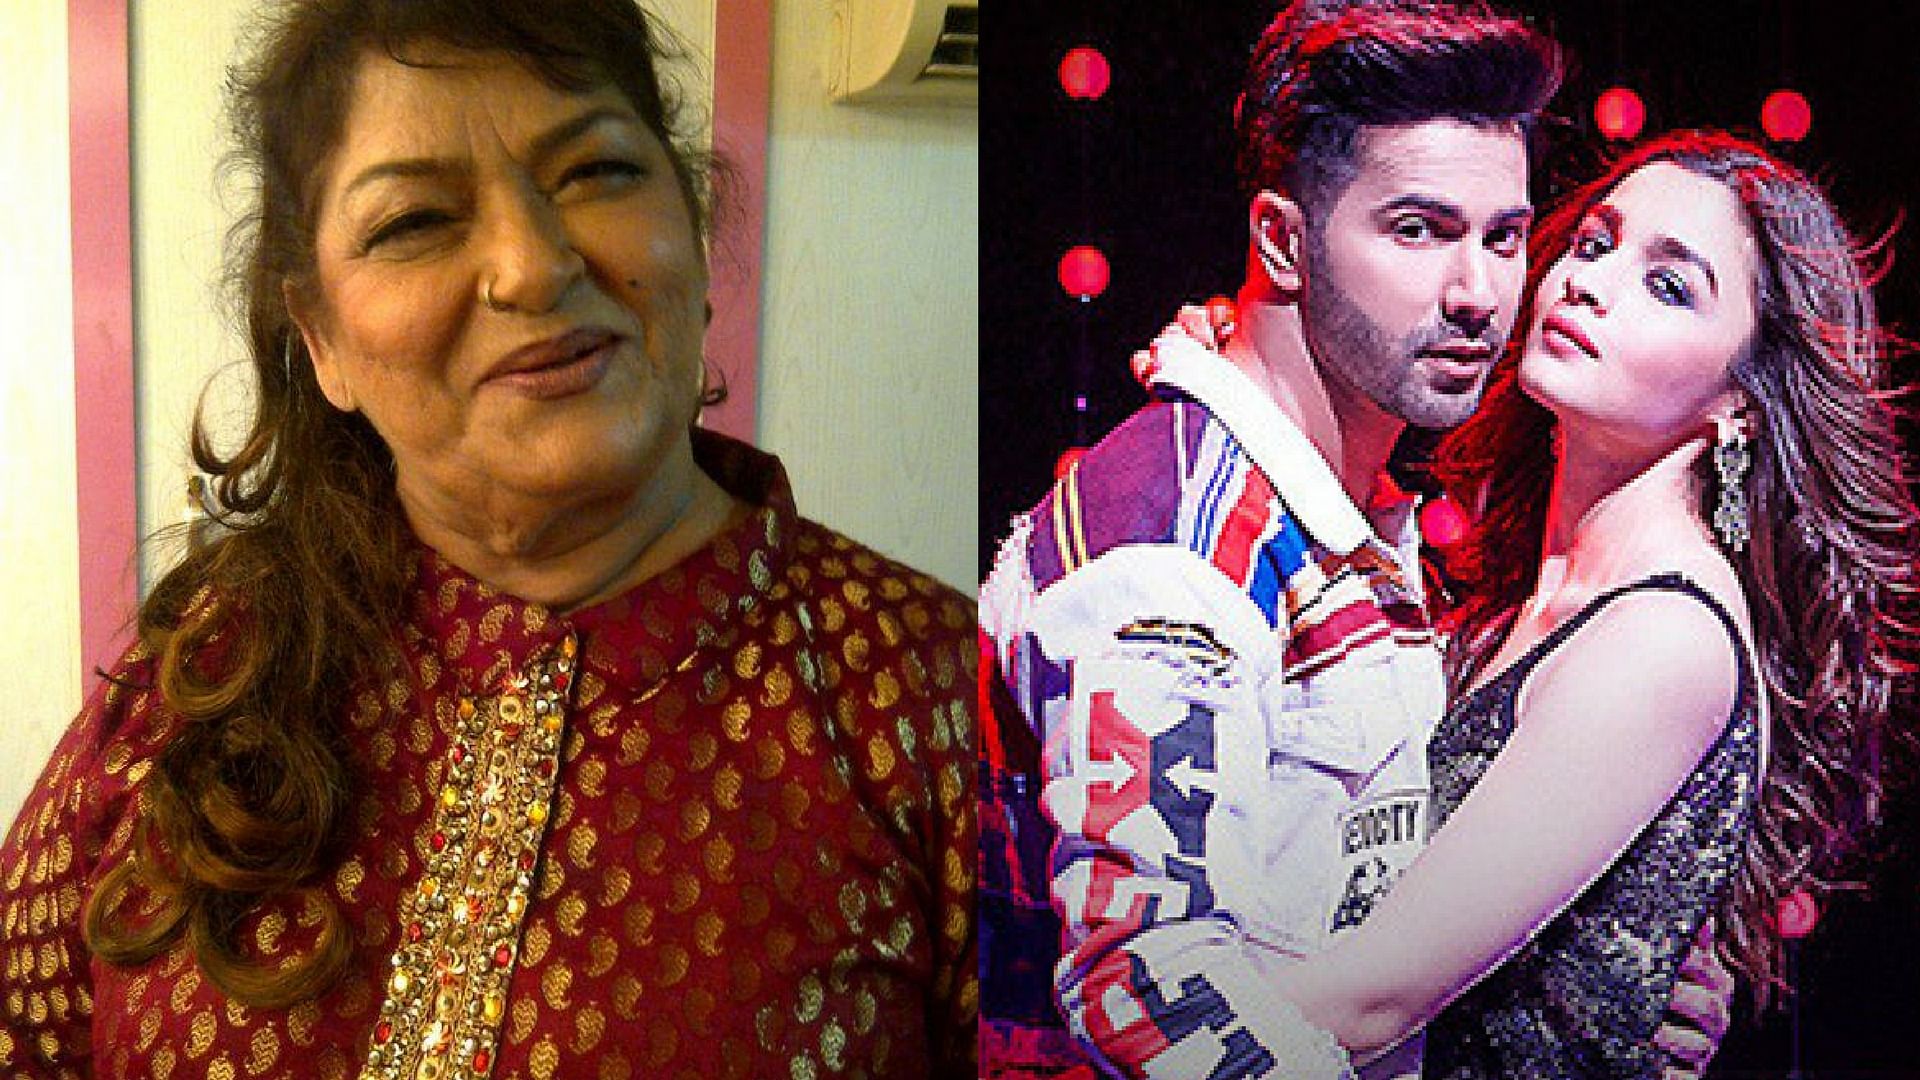 Saroj Khan, who choreographed the original song, has not been invited to promote <i>Tamma Tamma Again</i>. (Photo courtesy: <a href="https://www.facebook.com/photo.php?fbid=10202455842301351&amp;set=pb.1353077697.-2207520000.1487240556.&amp;type=3&amp;theater">Facebook/ SarojKhan</a>)